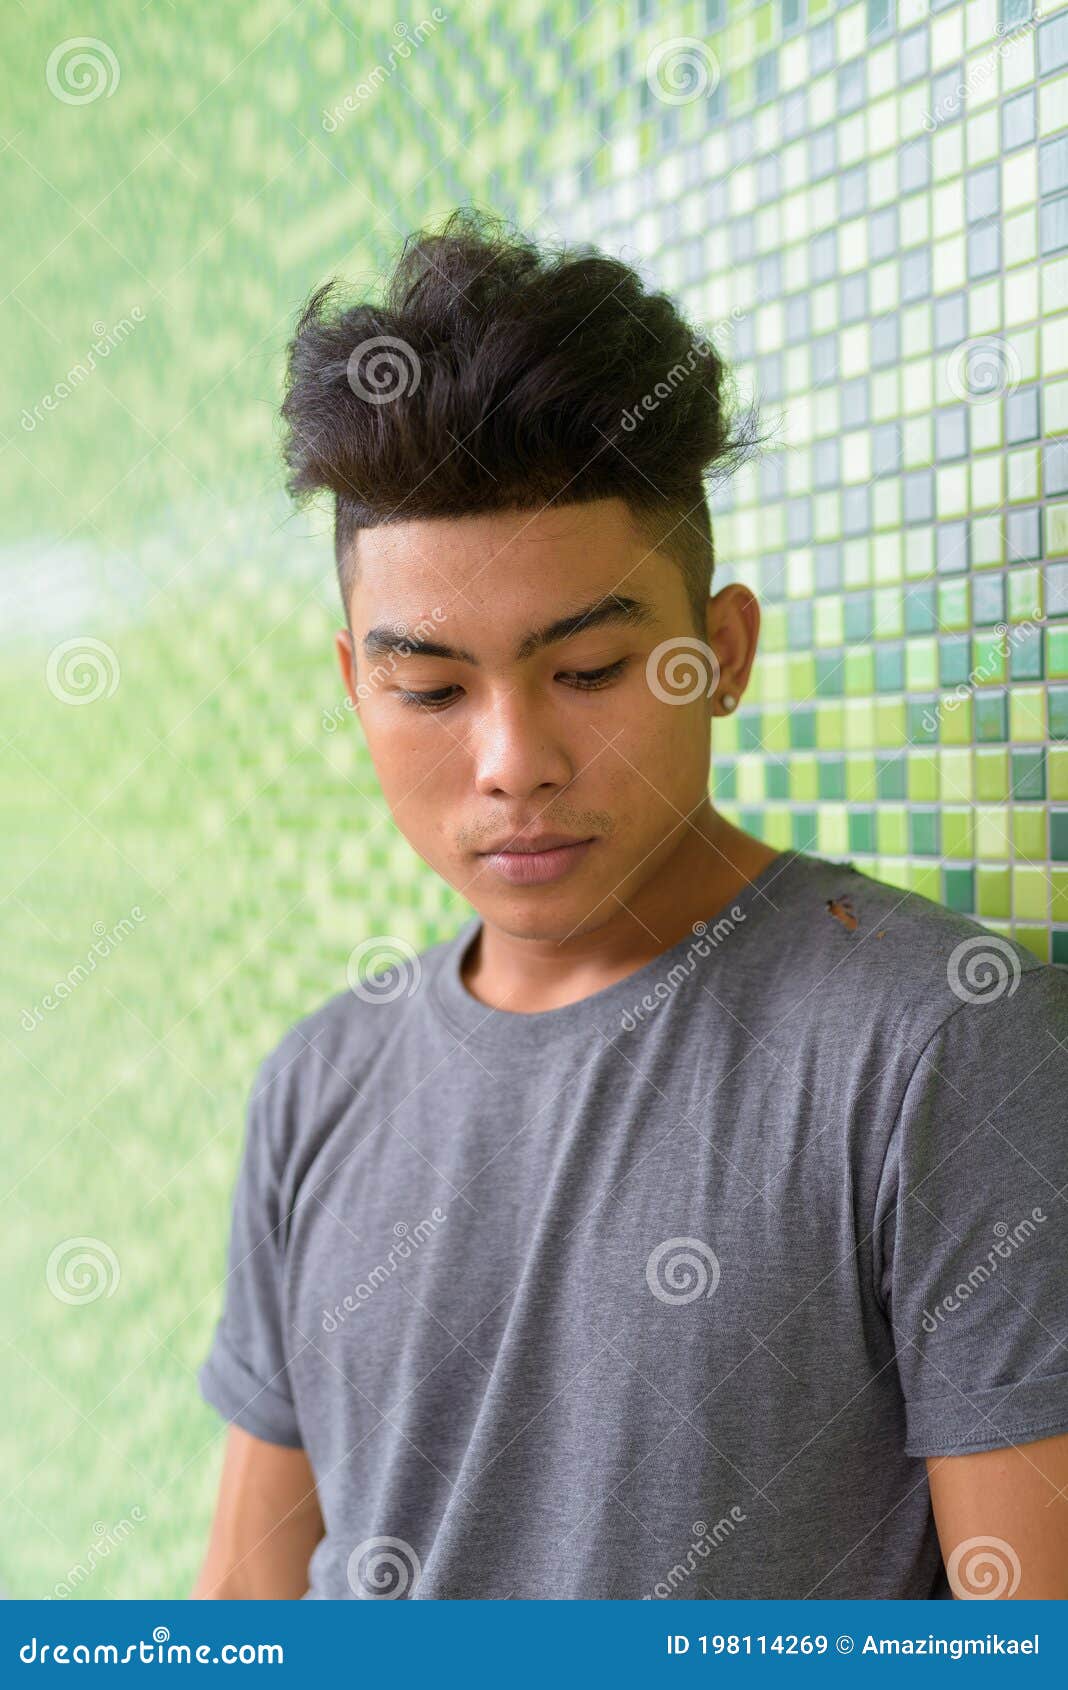 Face of Young Asian Man with Curly Hair Looking Down Against Green Wall  Outdoors Stock Image - Image of background, curly: 198114269